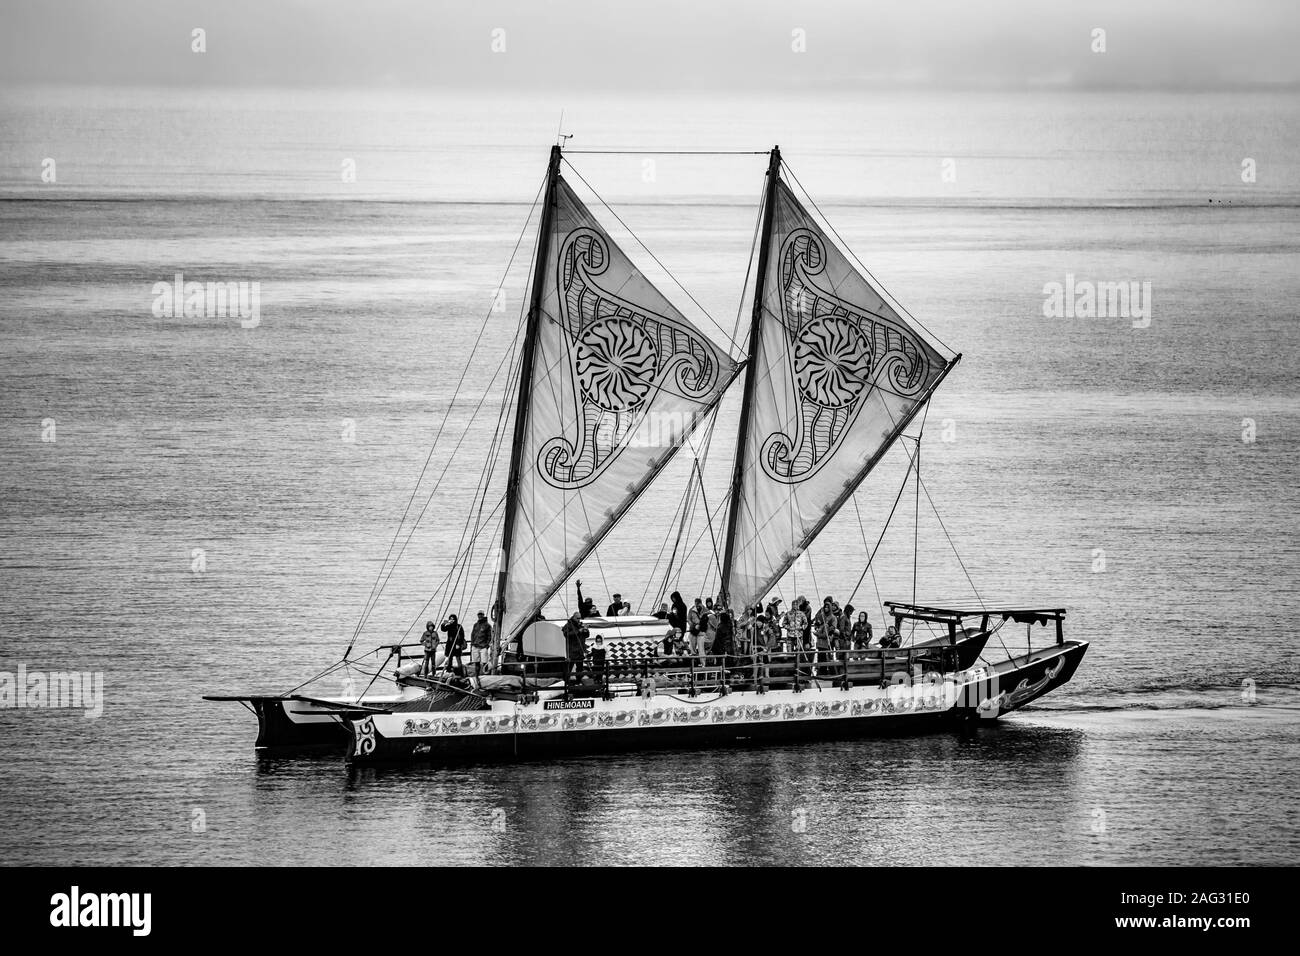 Polynesian boat with sail Black and White Stock Photos & Images - Alamy